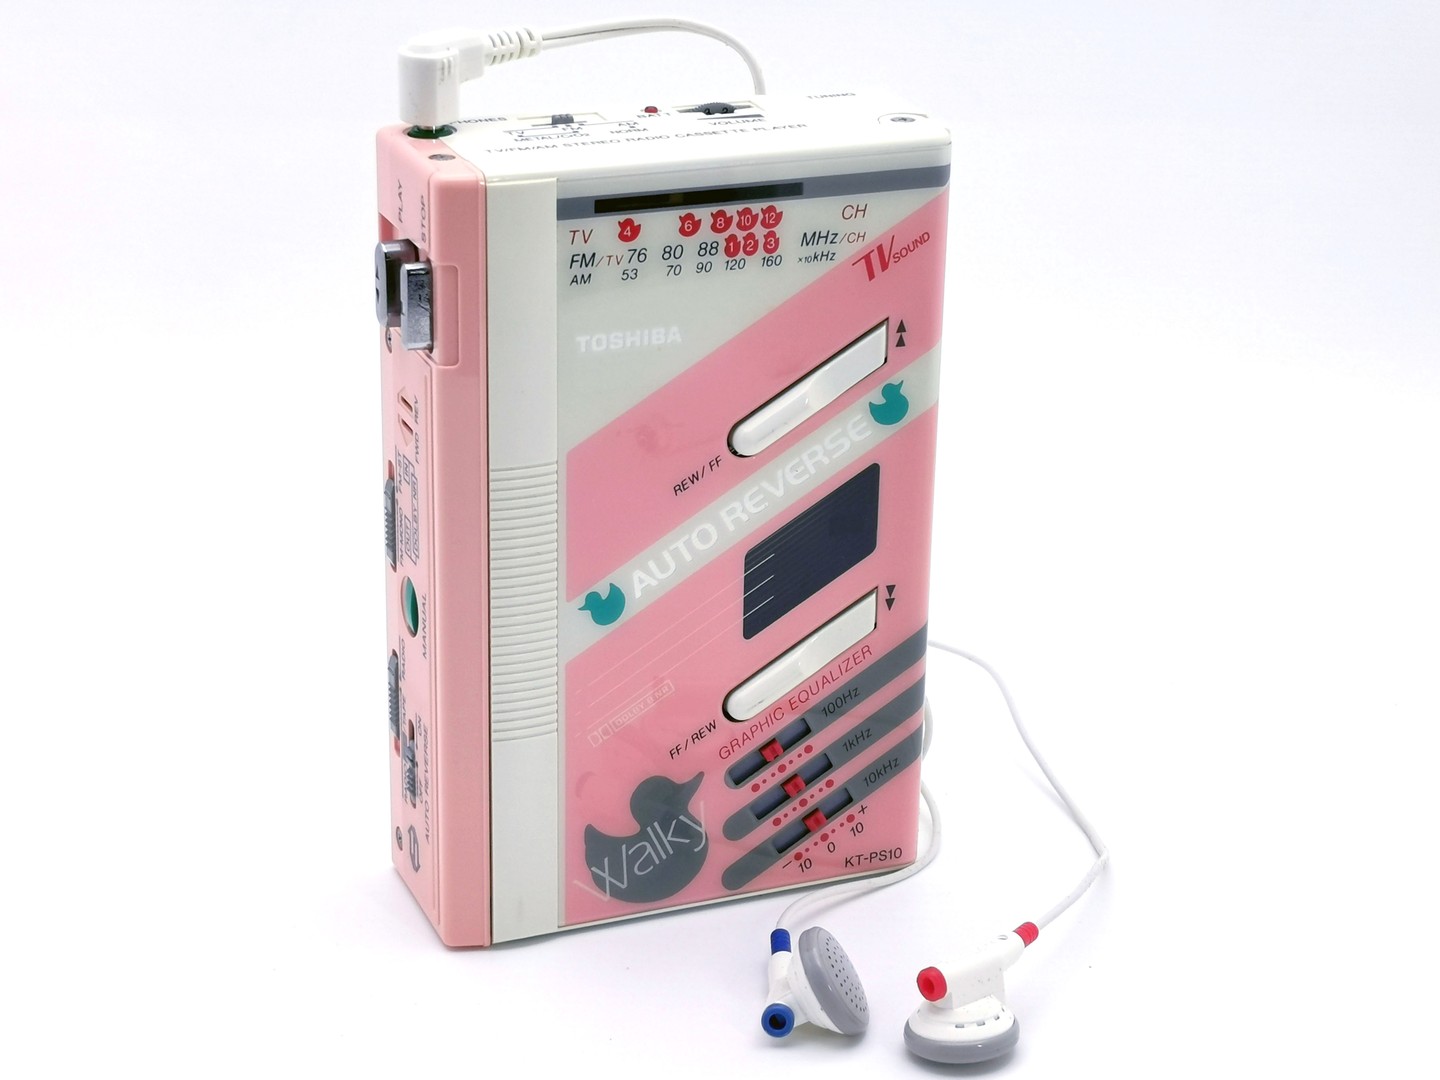 Toshiba-KT-PS10-Pink-Angled-with-accessories-ig-boxedwalkman